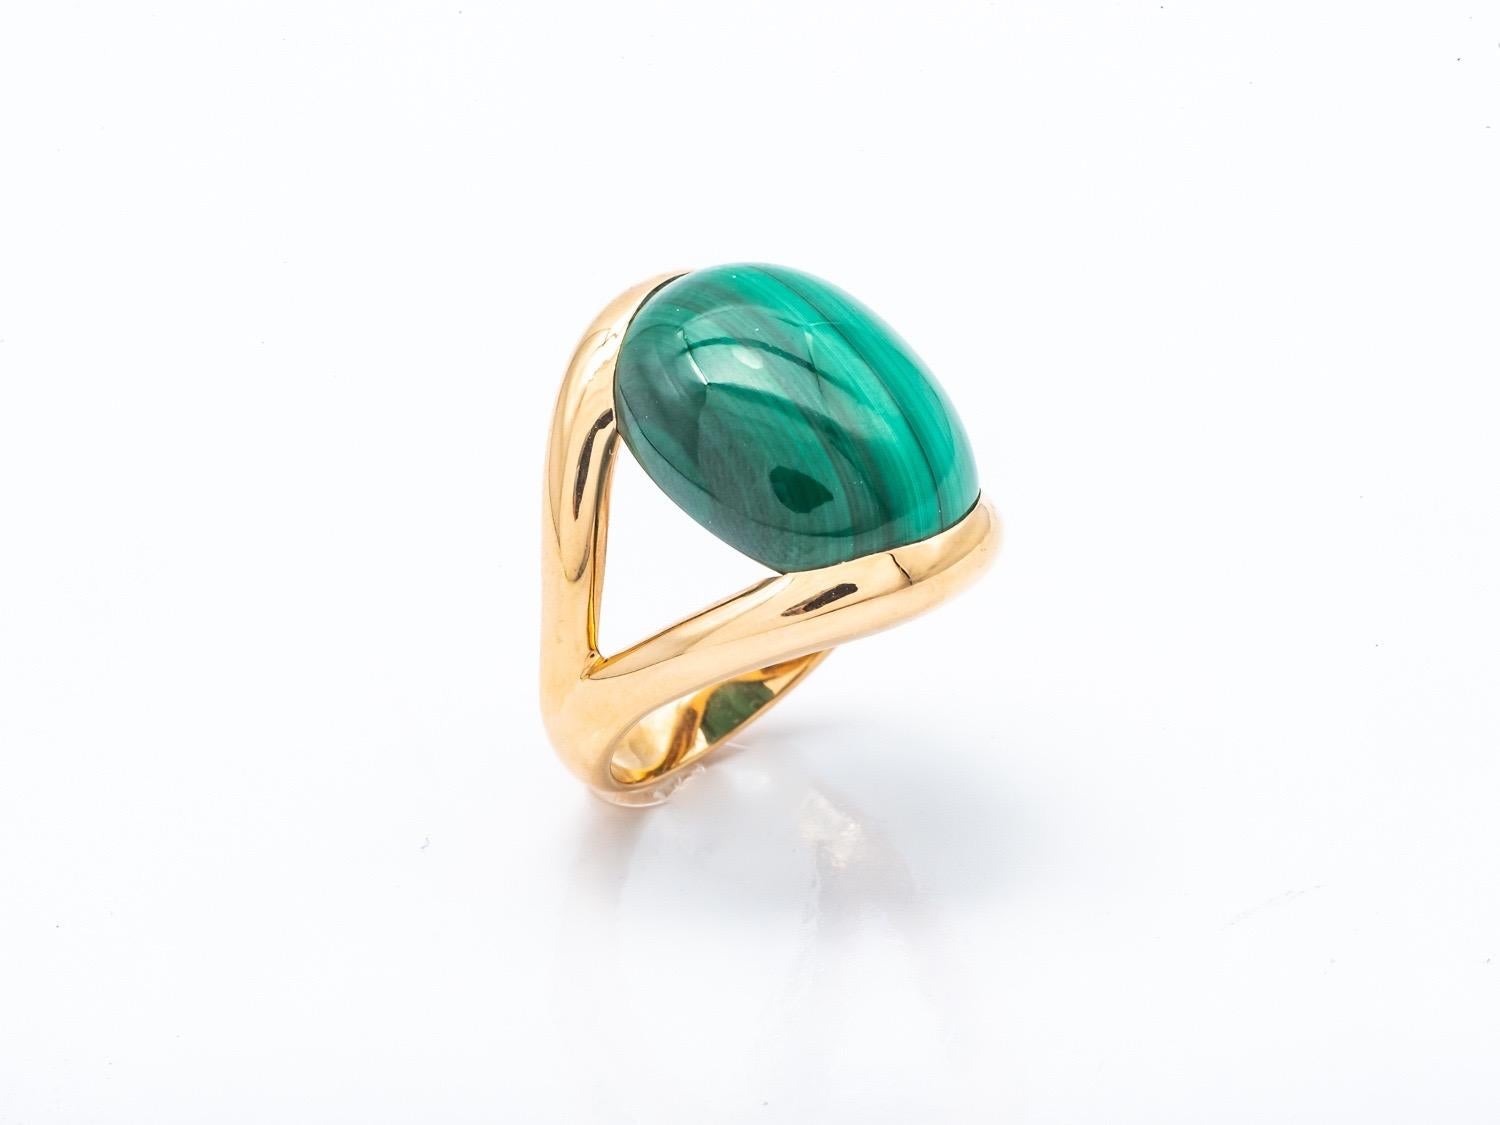 Gold ring 18 Carat Surmonte of a Malachite cut in Cabochon.

French size 53
USA size 61/4
Japon size 13

Solid gold 18 karat for 6.94 grams.
this ring can be set for the size according to your suit .